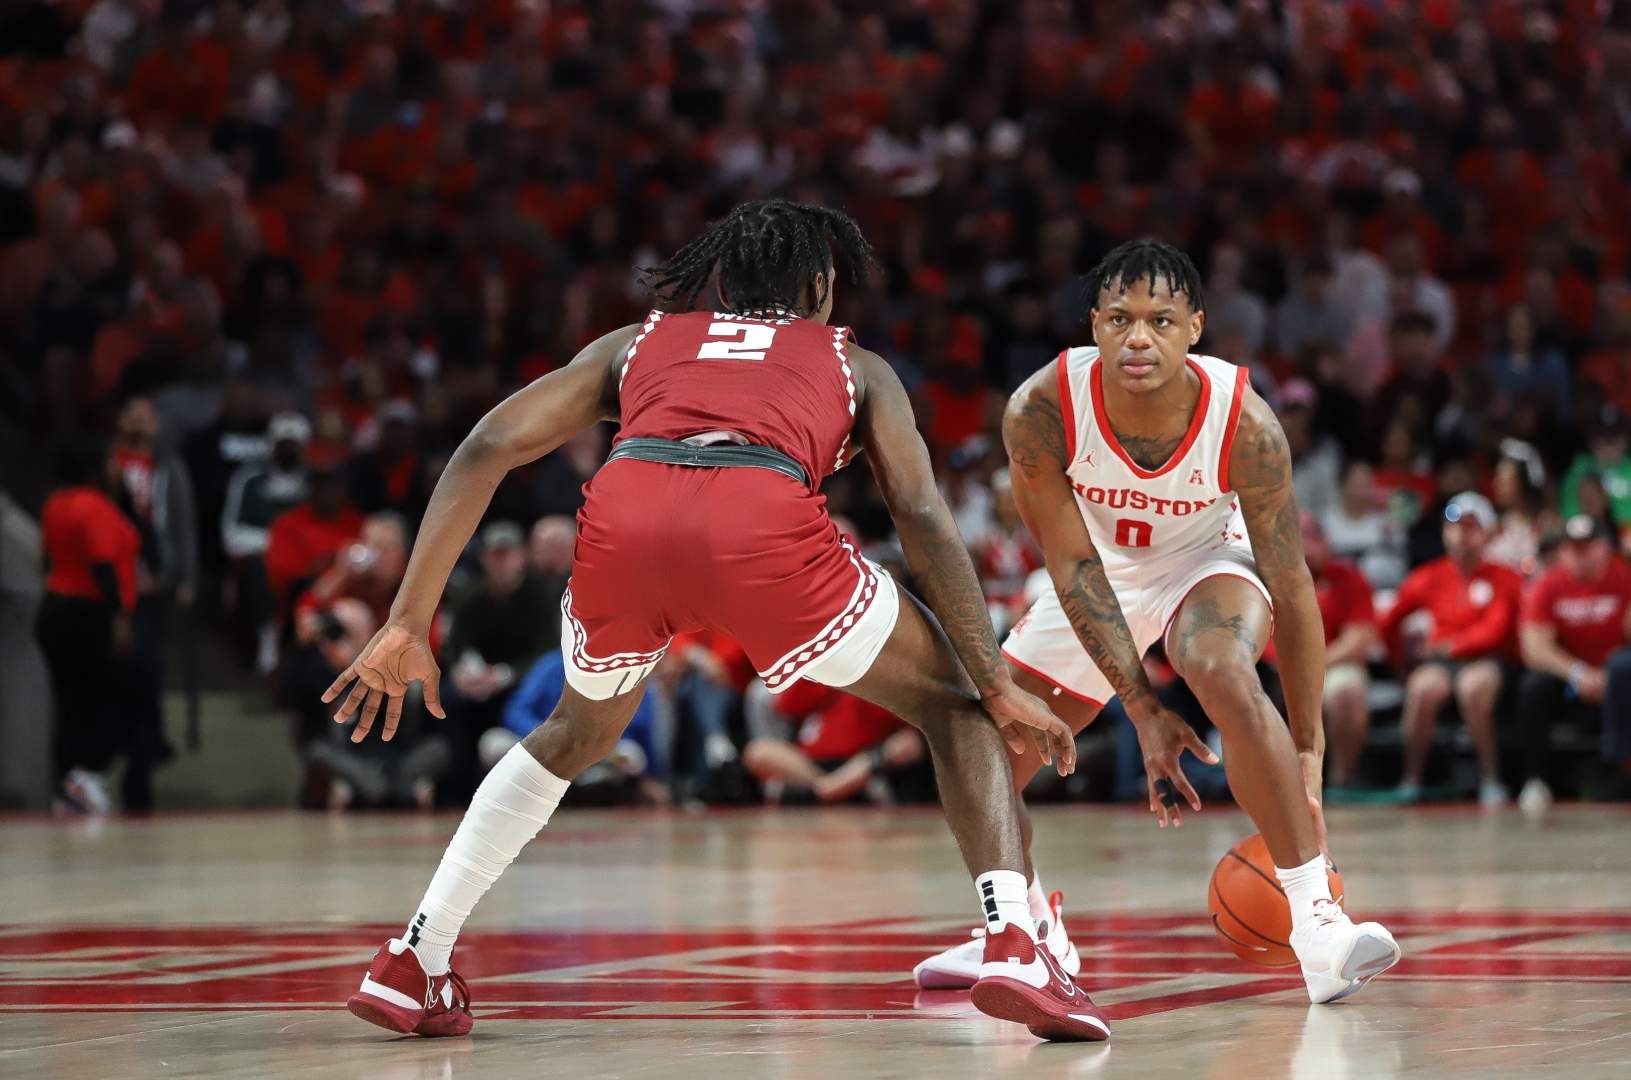 UH guard Marcus Sasser was held to just 12 points in the Cougars' loss to Temple on Sunday afternoon. | Anh Le/The Cougar